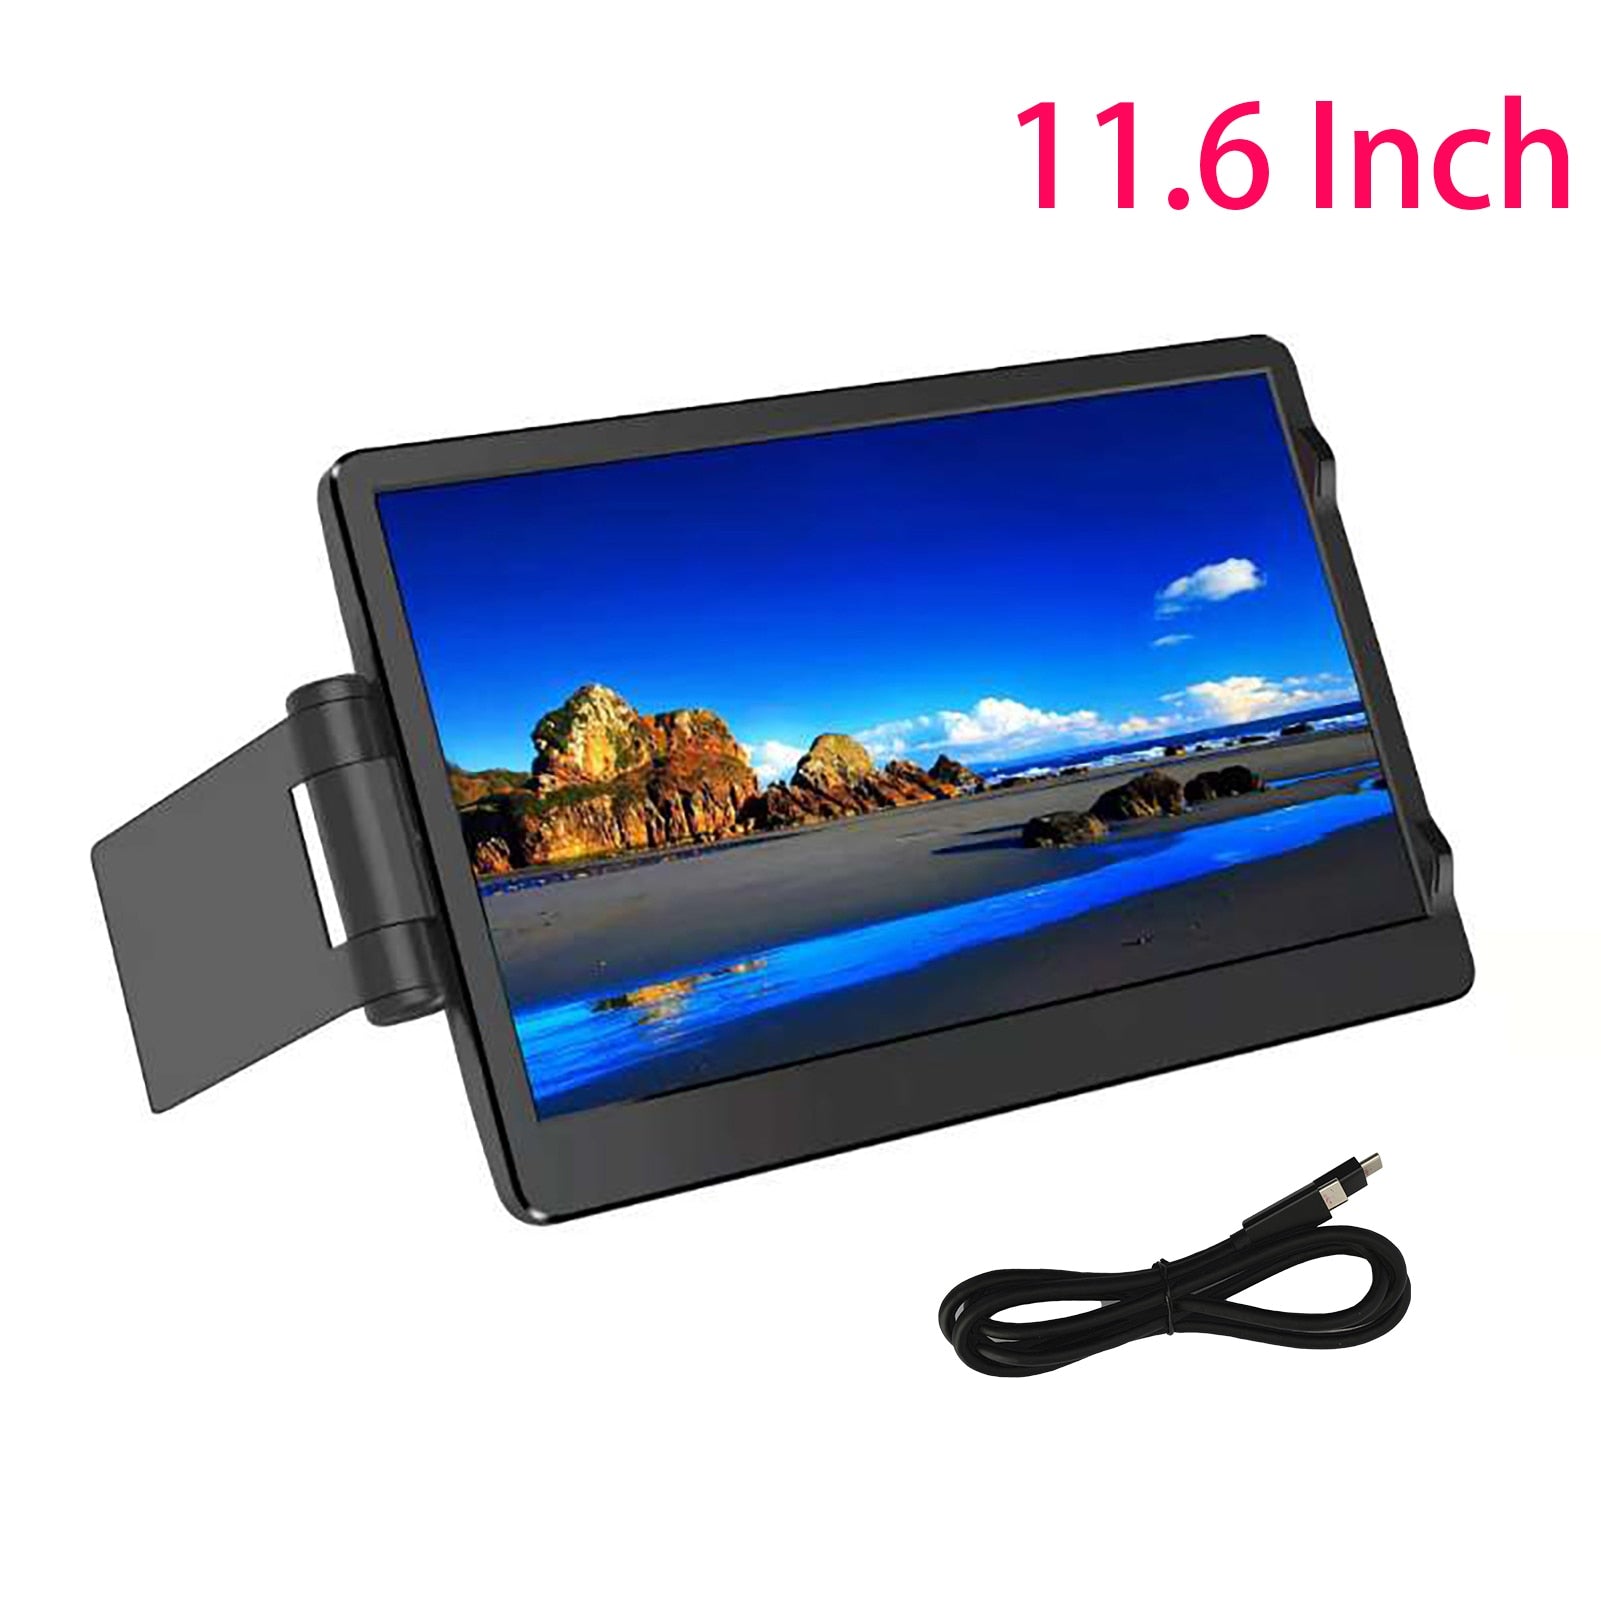 14.6 Inch LCD Laptop Monitor Foldable Screen For Conference Office Type C HDMI Computer Phone Switch PS4/5 Gaming Monitor Panel